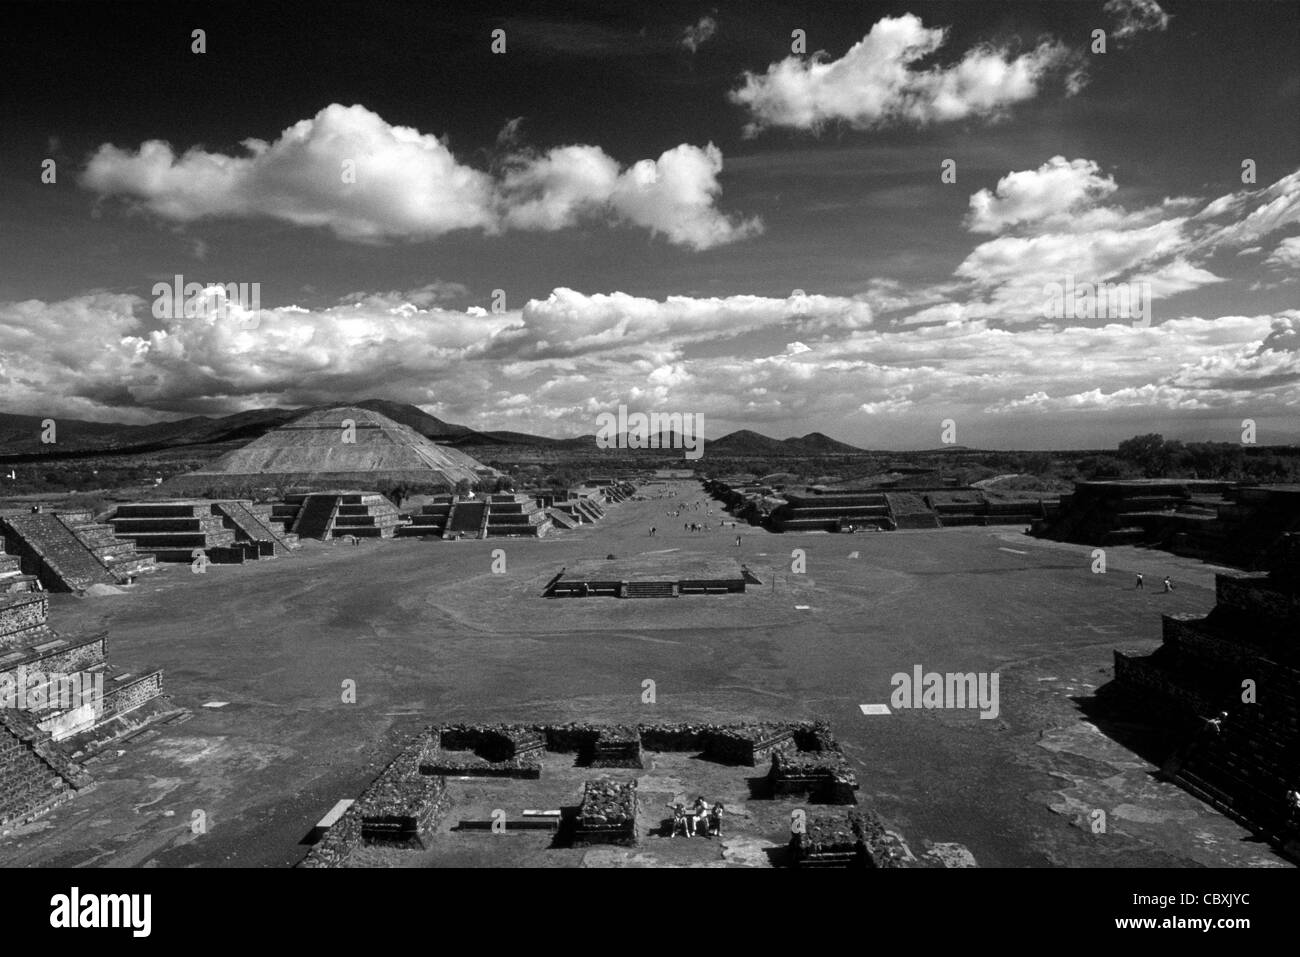 The Avenue of the Dead and Pyramid of the Sun from the top of the Pyramid of the Moon, Teotihuacan, Mexico Stock Photo